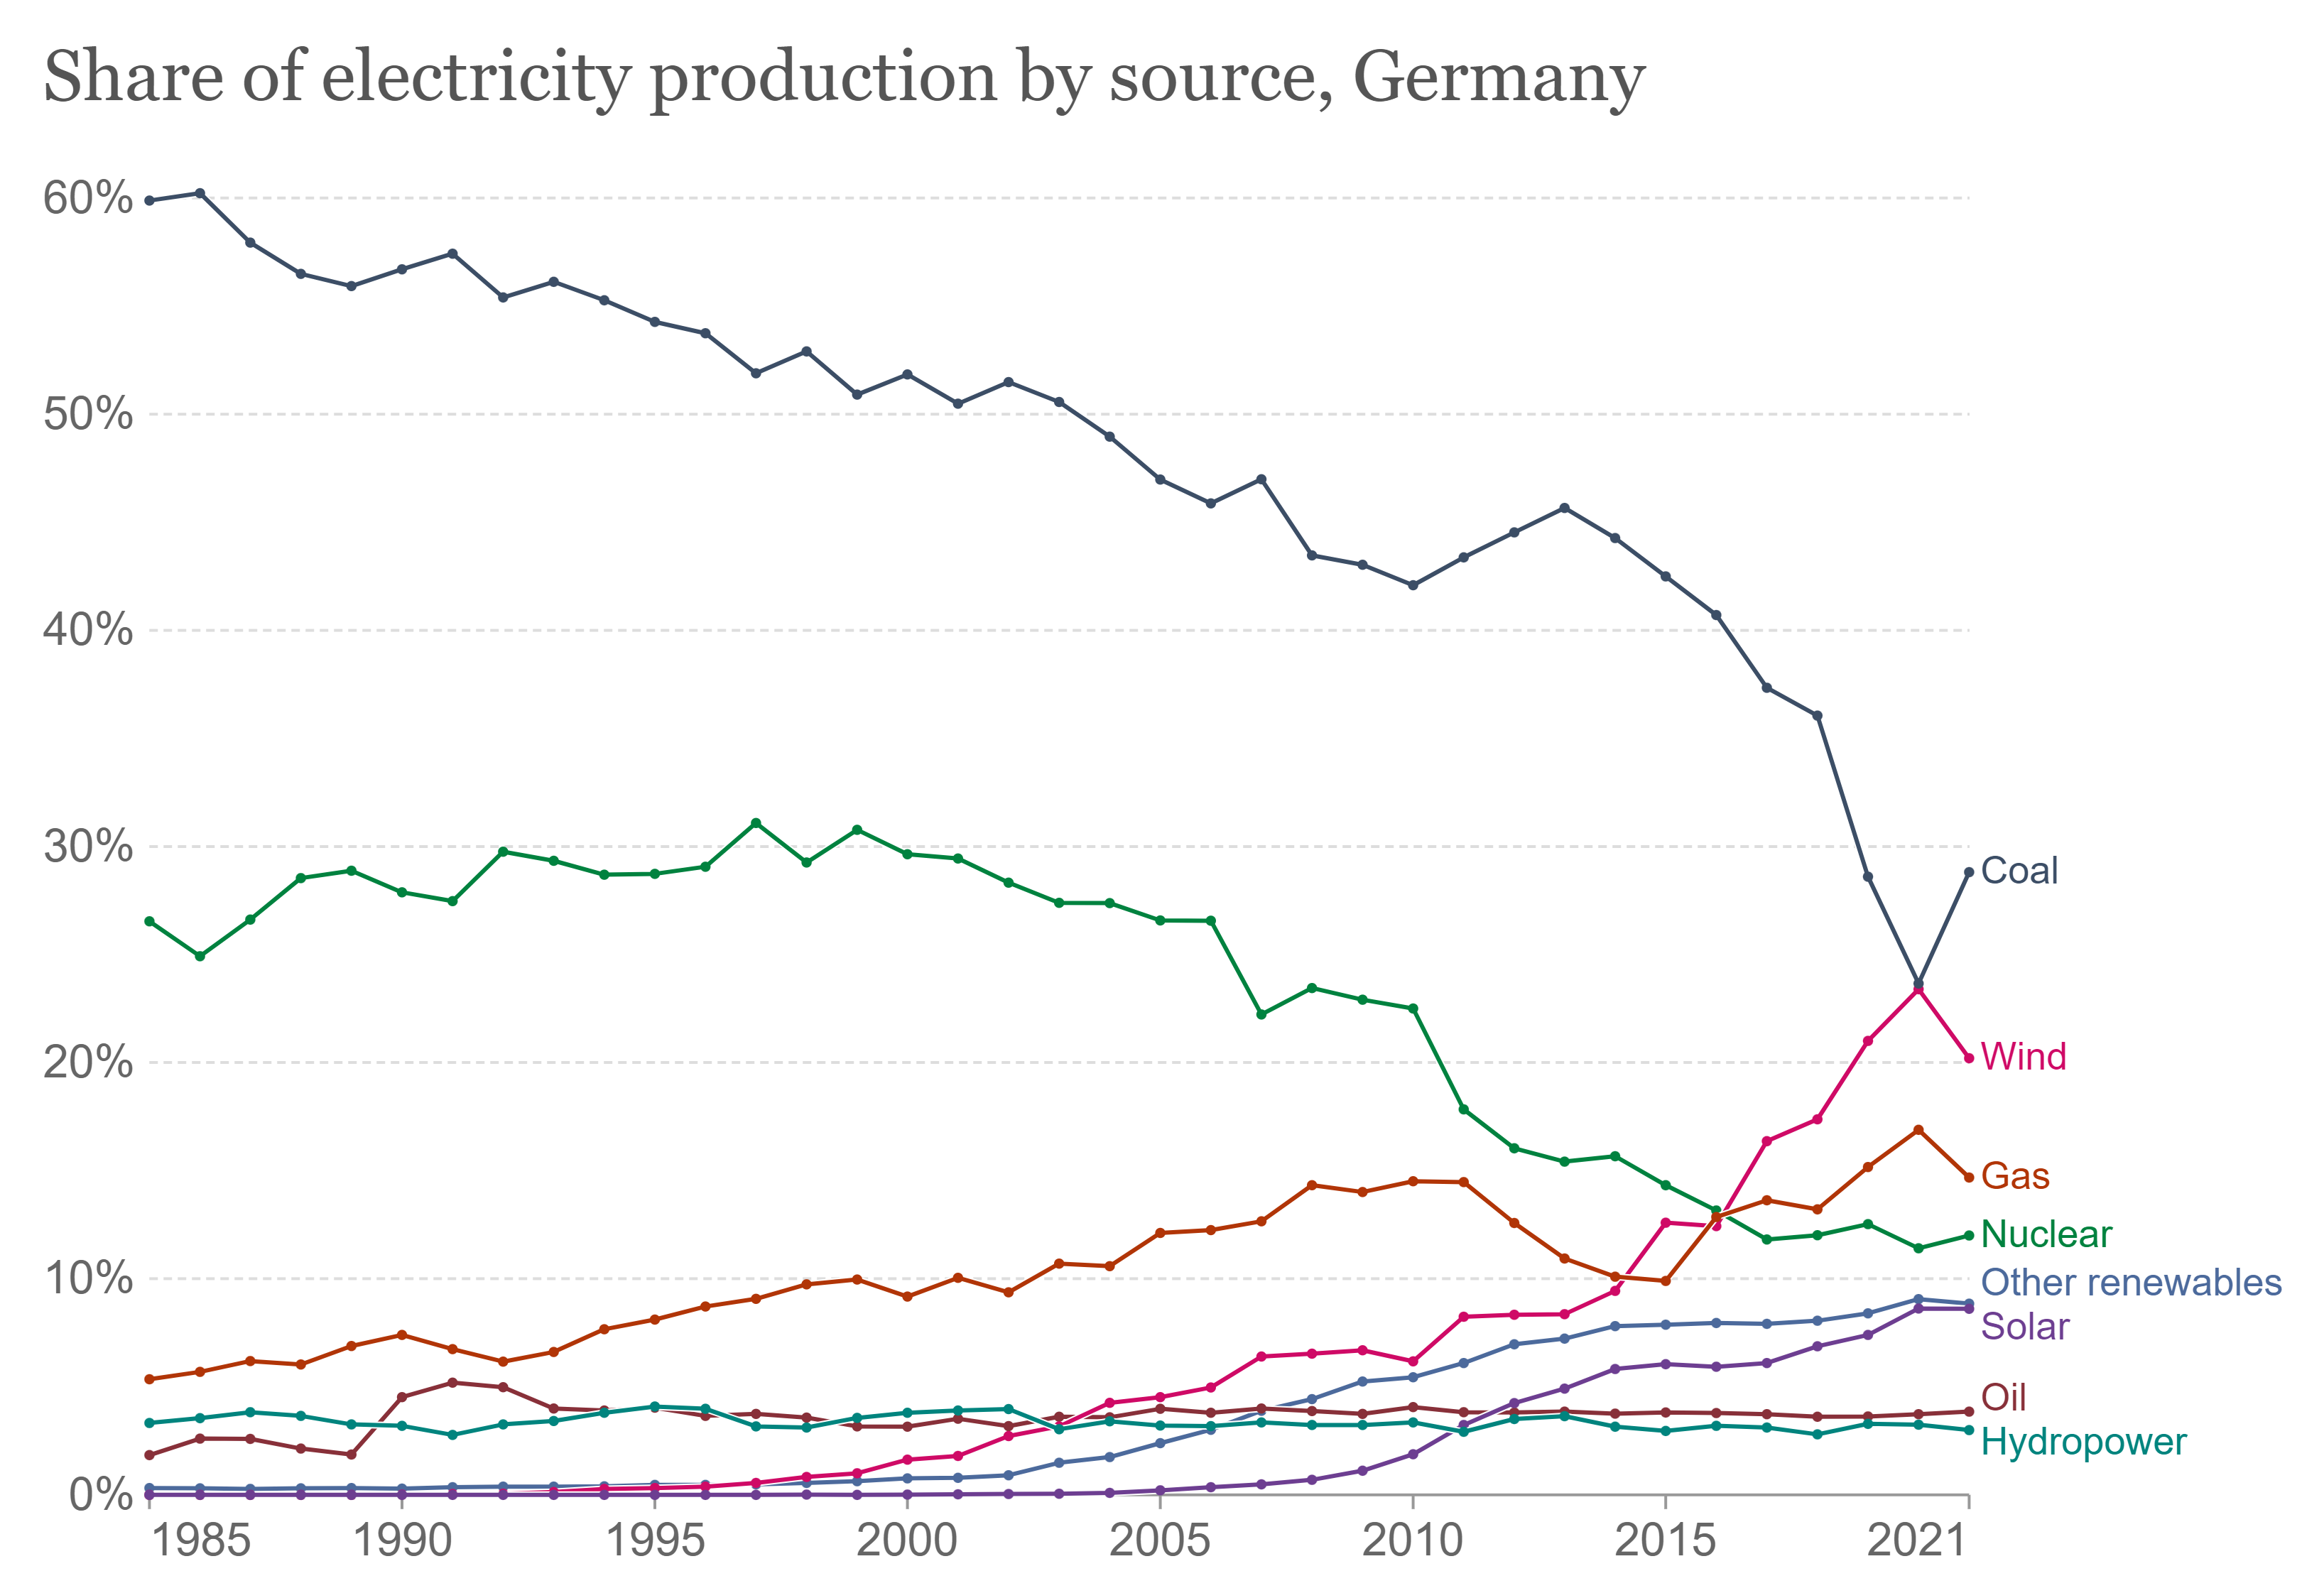 Share of electricity production by source in Germany